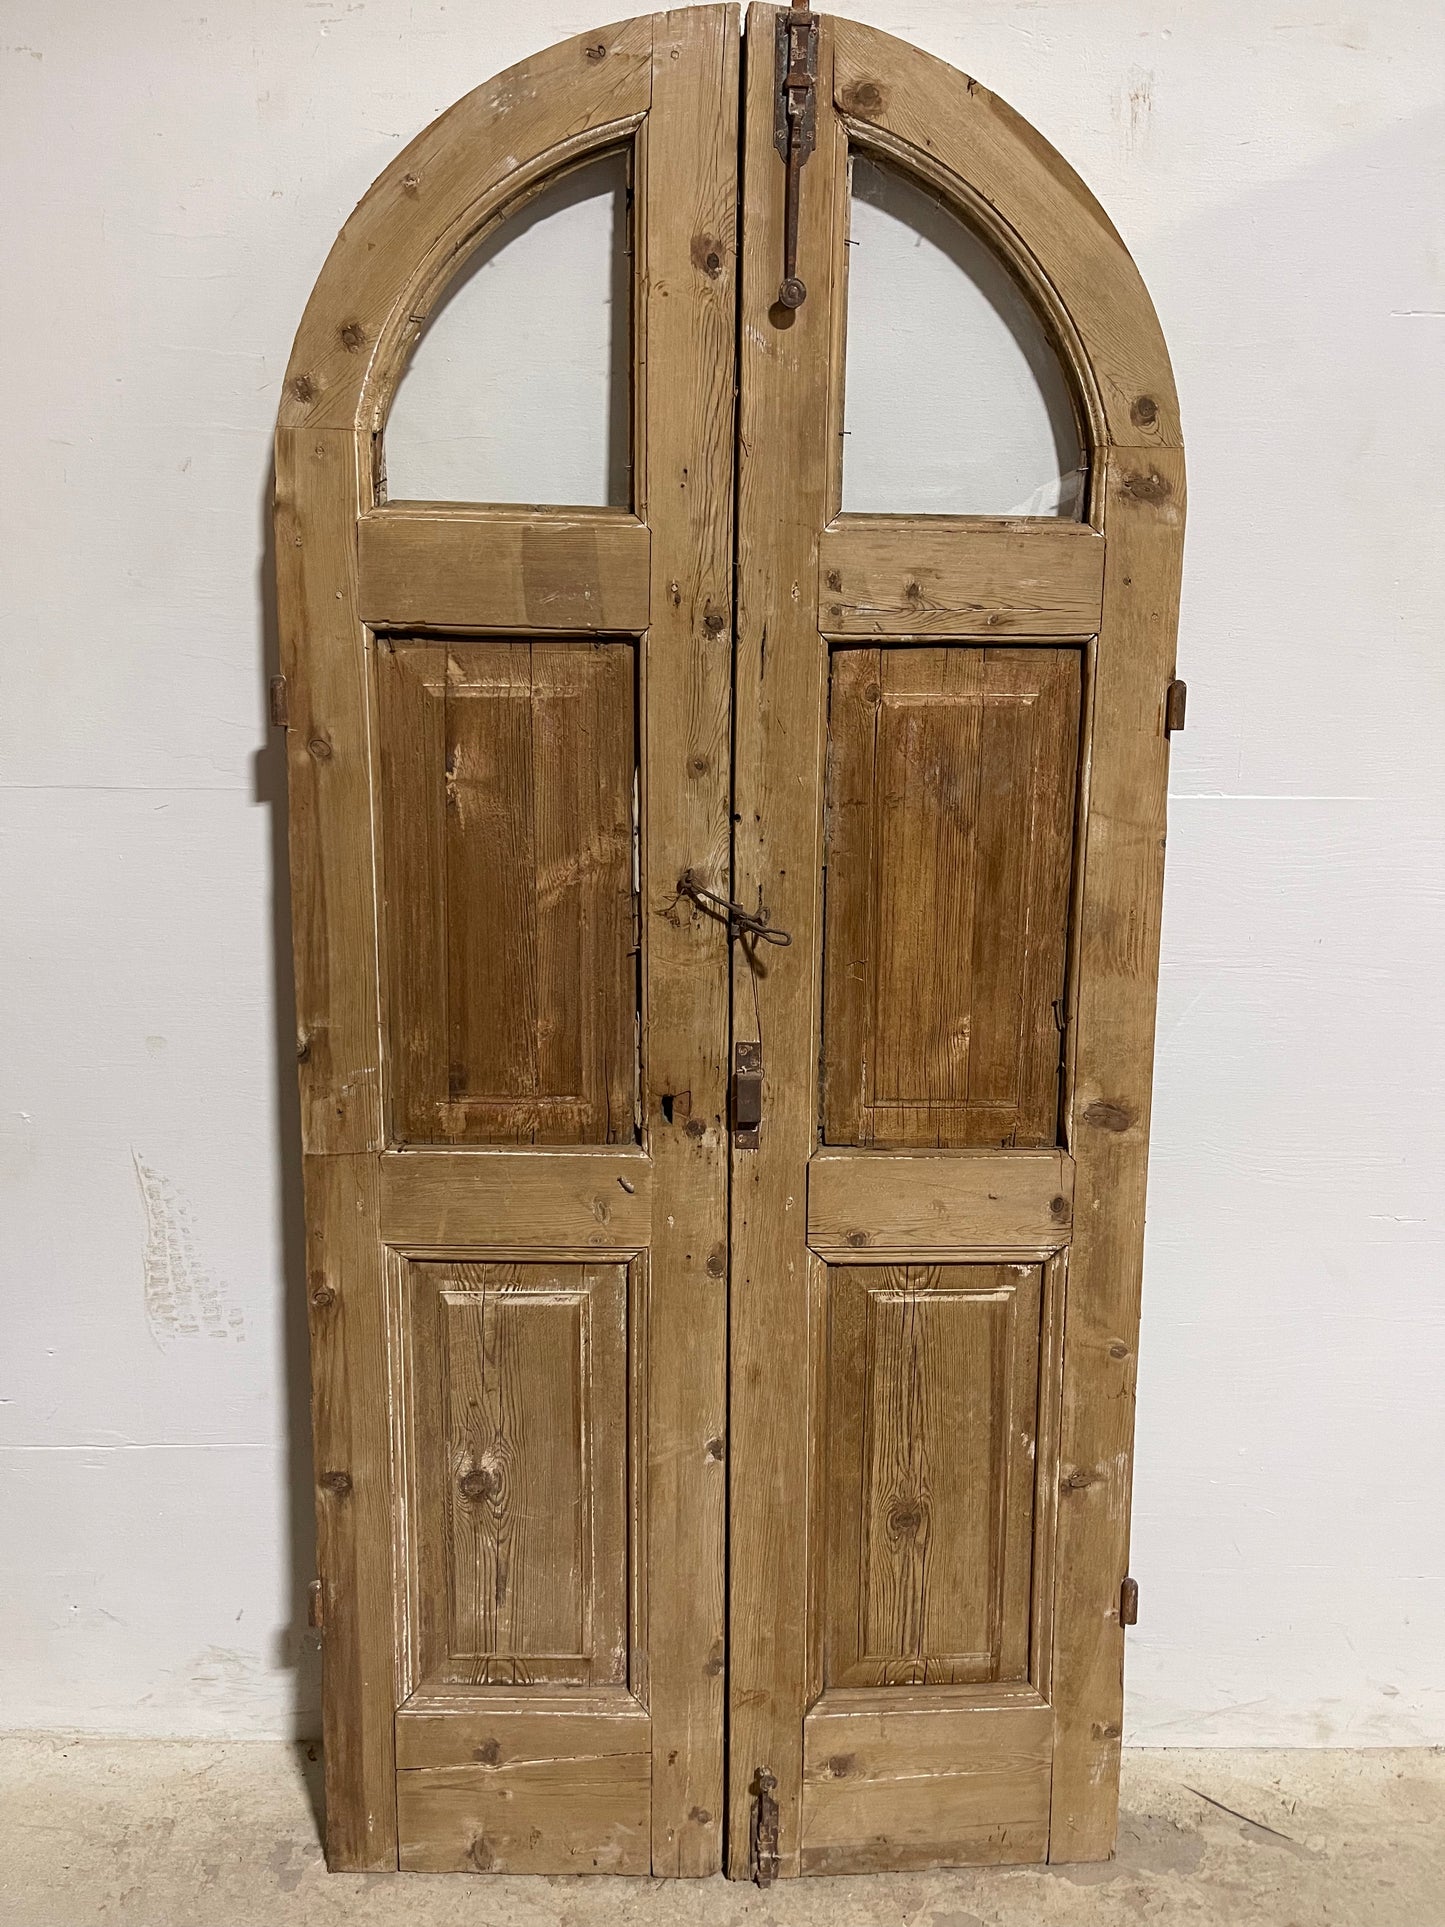 Antique French Panel Doors with glass (77x35.5) J922